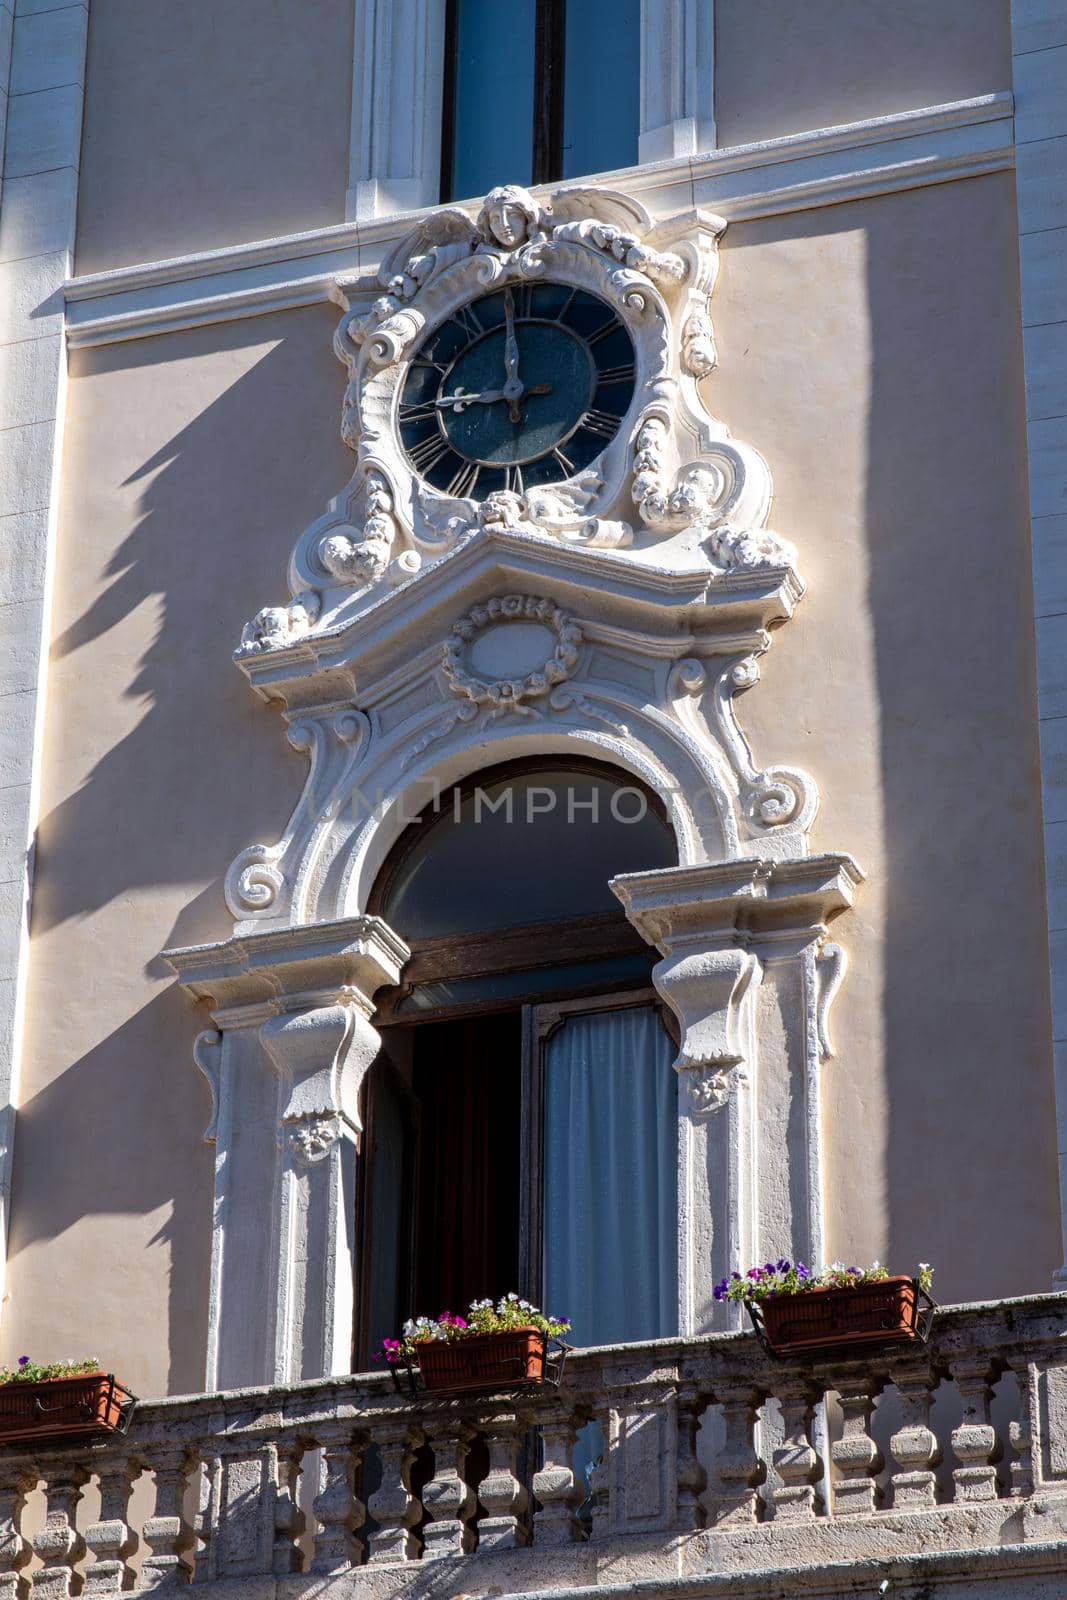 details of the municipality in the facade by carfedeph